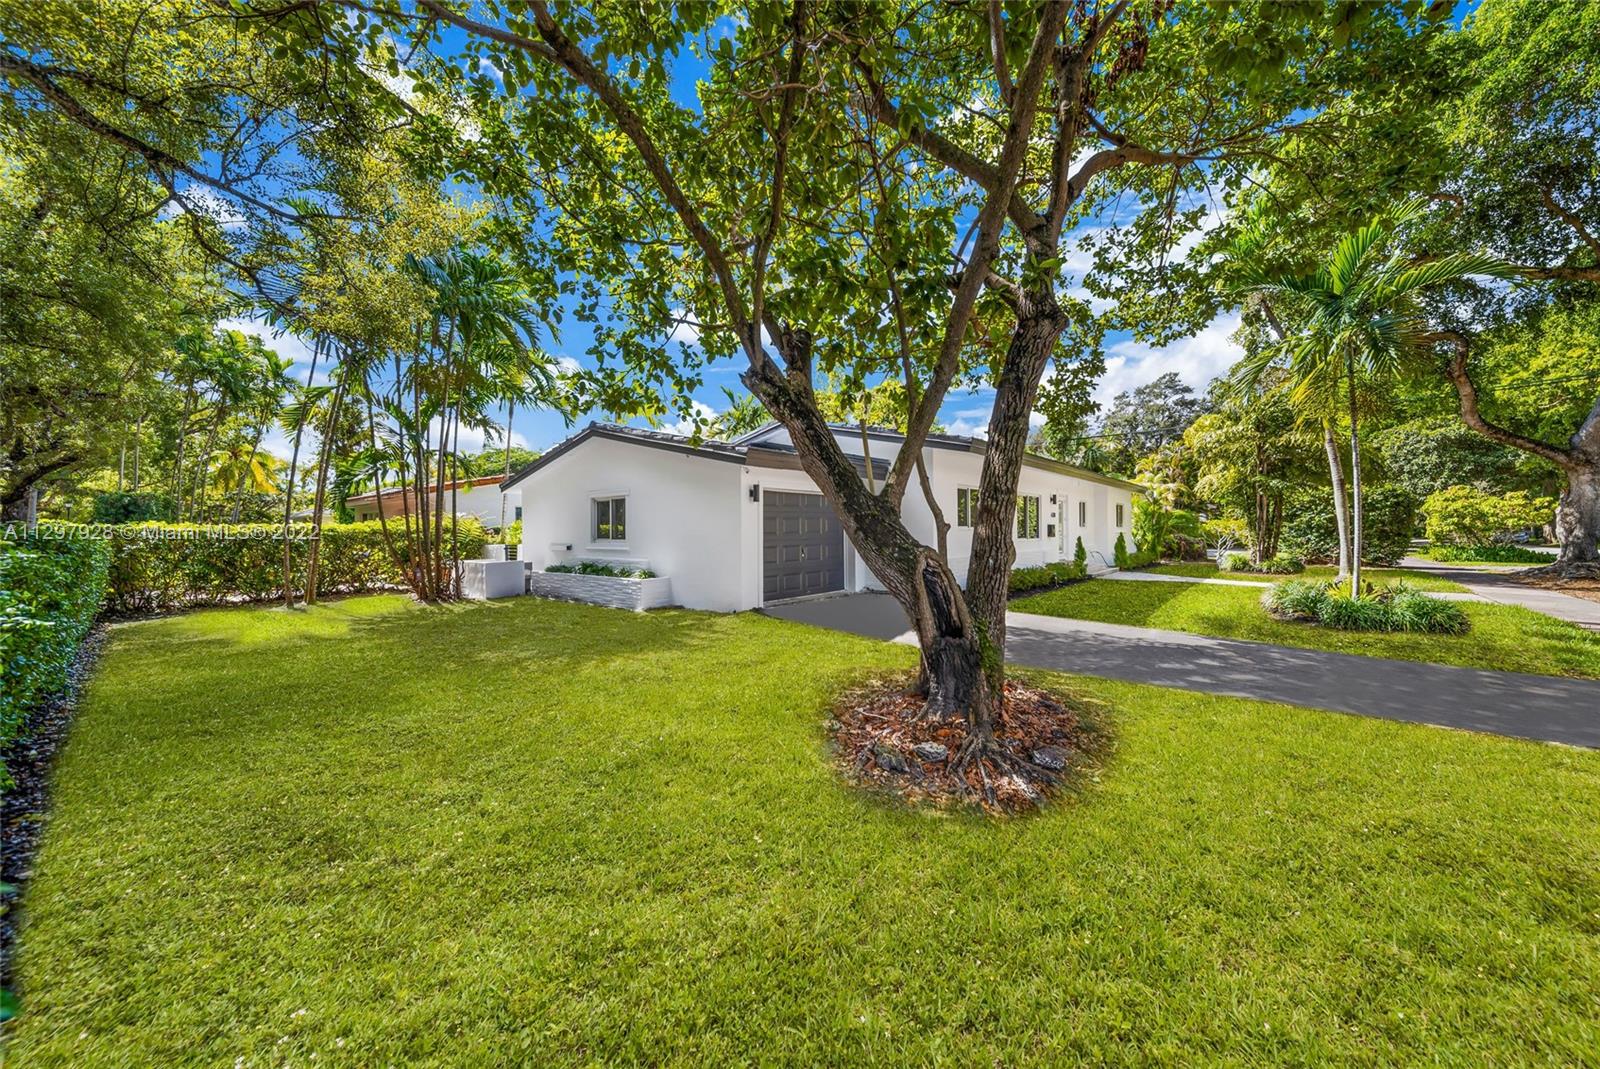 A completely remodeled Single Family house at prime location in Coral Gables! 3 beds 2 baths and car garage! High-end finishes include 24x48 imported Spanish porcelain flooring, gorgeous custom kitchen with black stainless steel appliances, electrical & PVC plumbing, and much more. IMPACT windows all around the house. Built-in BBQ in the backyard. 7k sqft lot! Take advantage of this beautiful house Ready to move in! Won't last